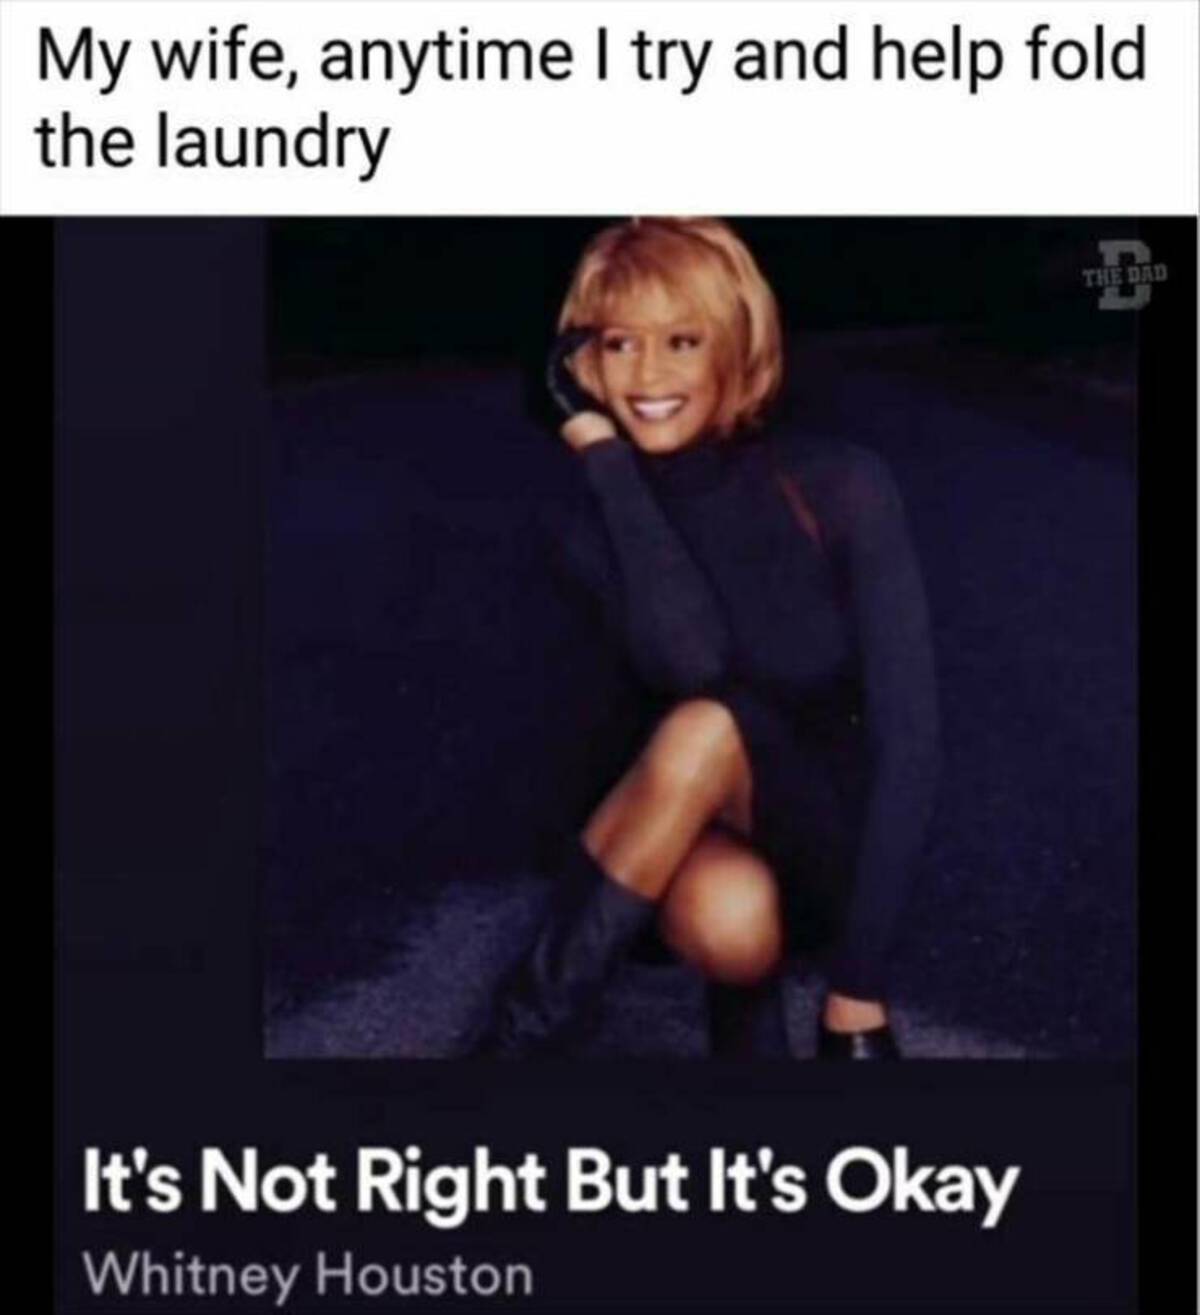 photo caption - My wife, anytime I try and help fold the laundry It's Not Right But It's Okay Whitney Houston B The Dad